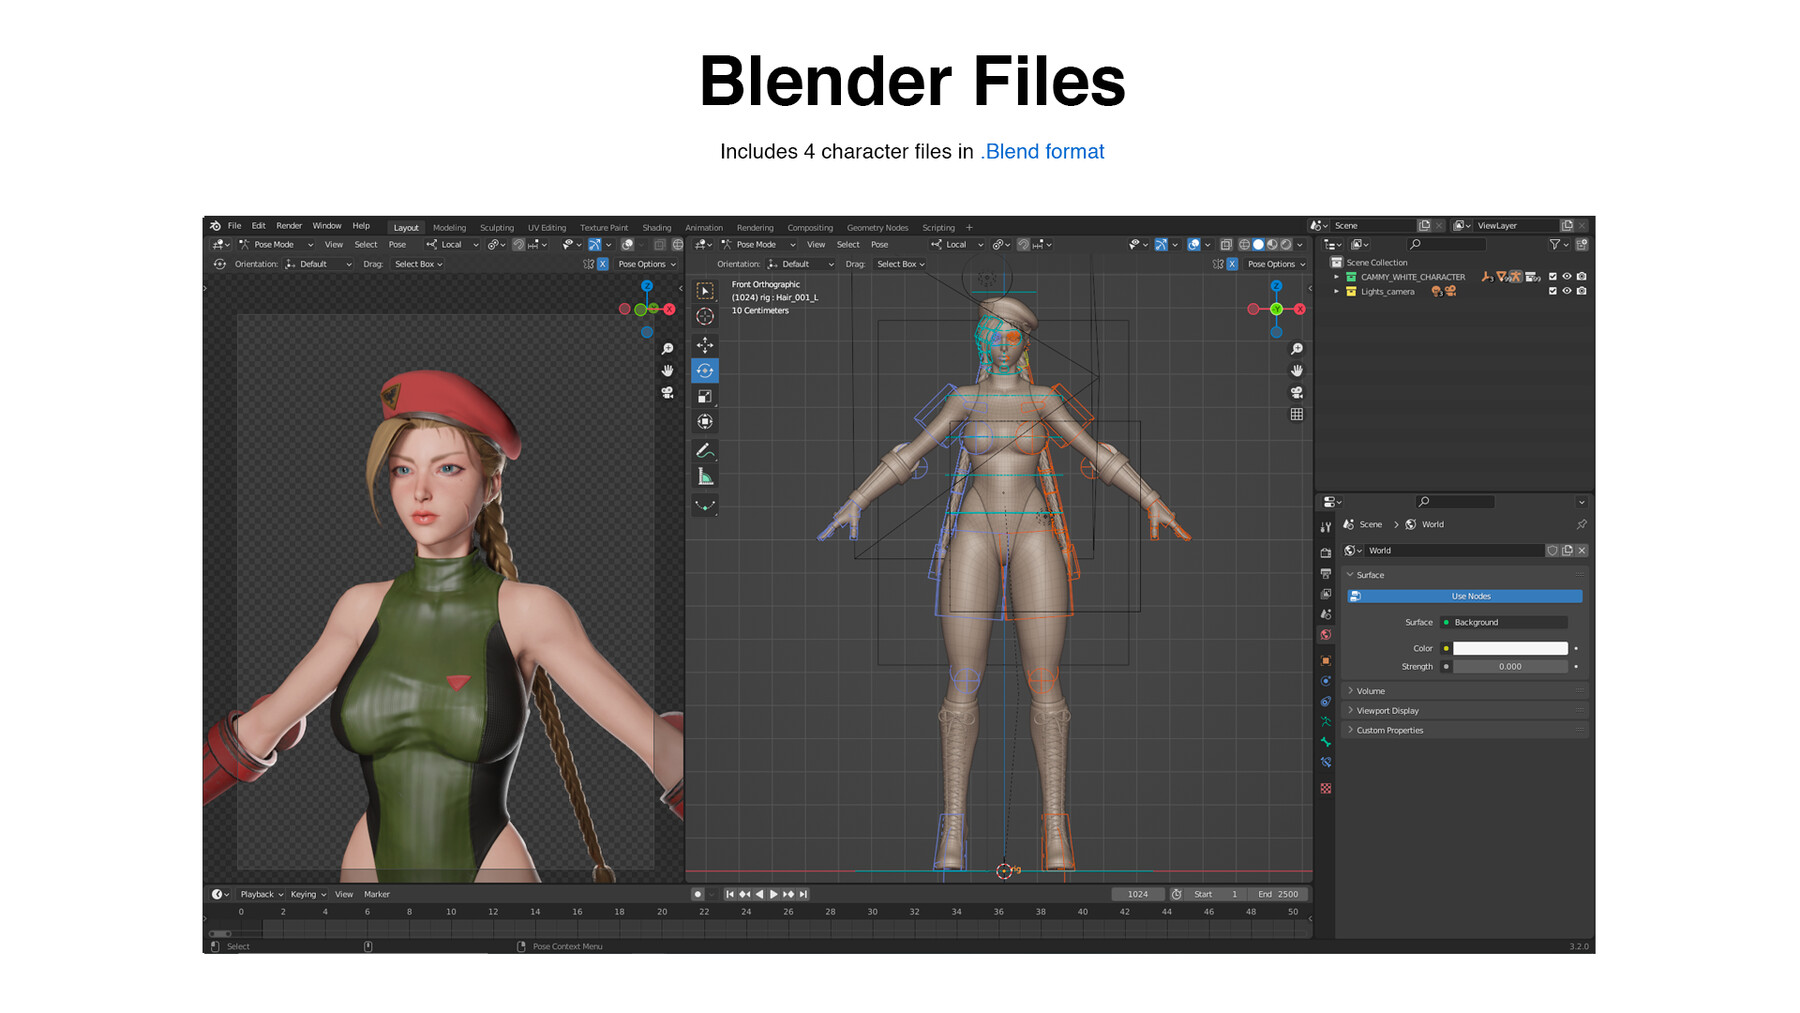 ArtStation - Cammy Street Fighter Lowpoly Rigged